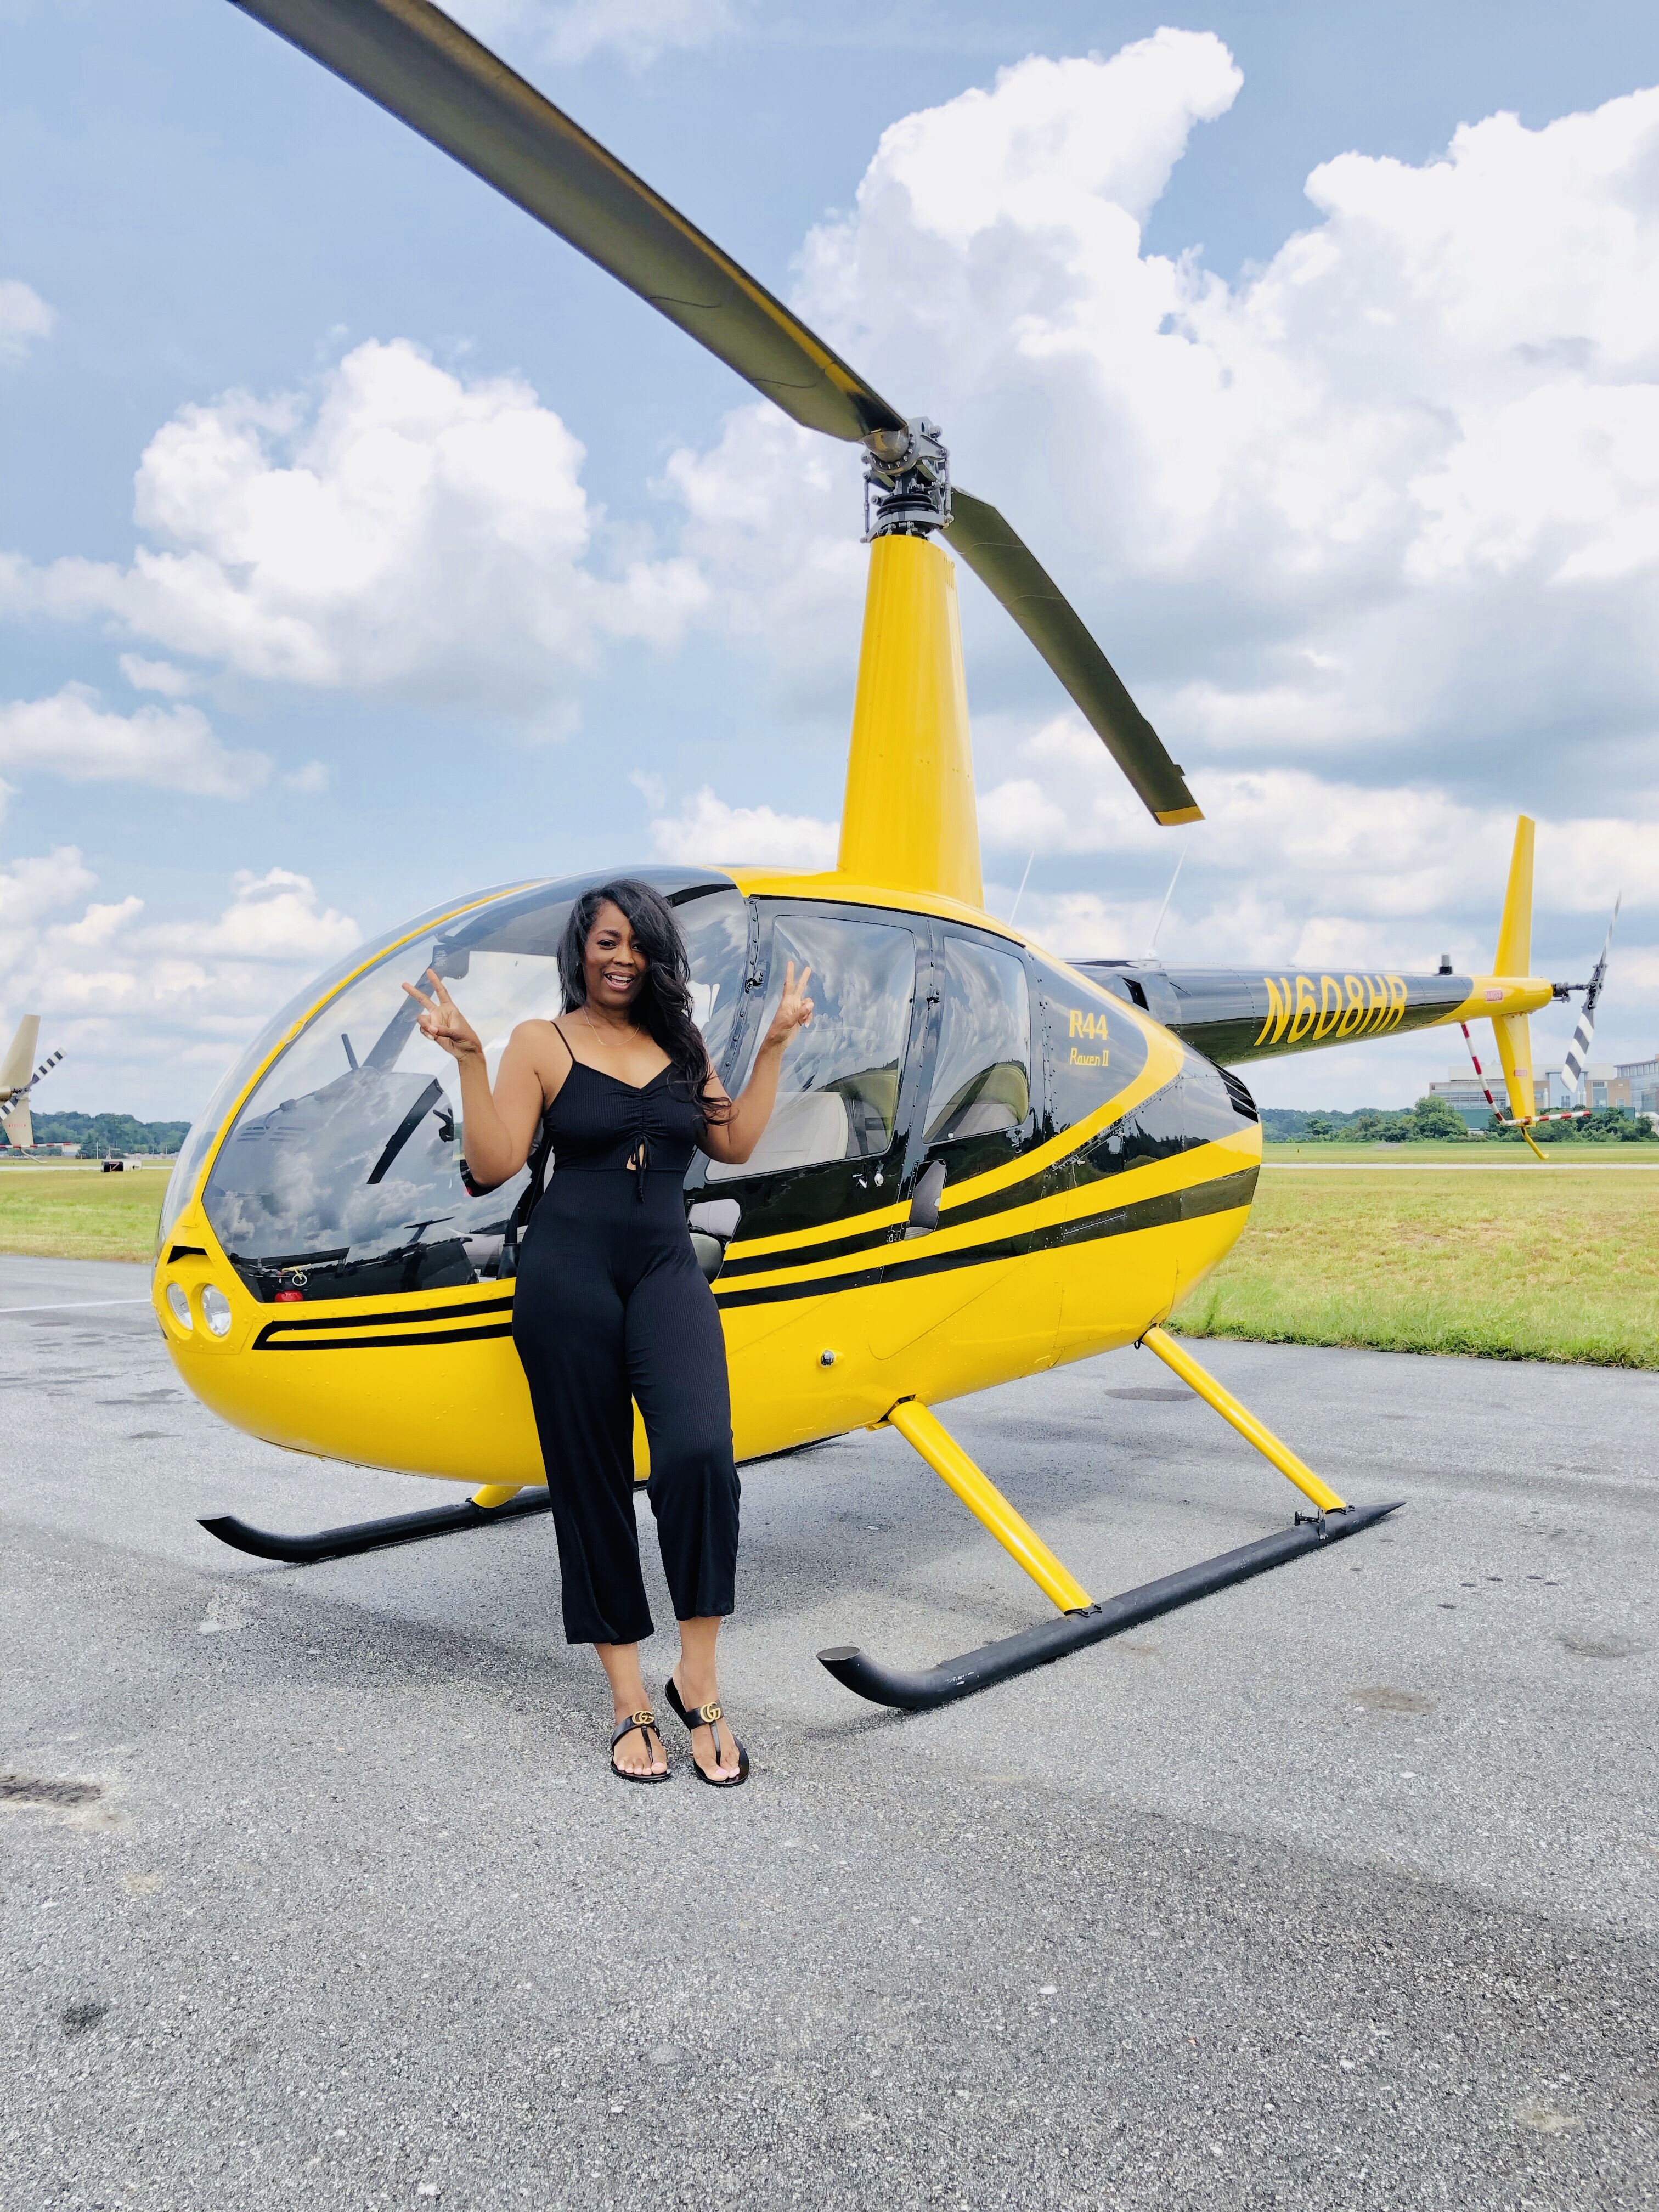 Helicopter Ride Over Atlanta